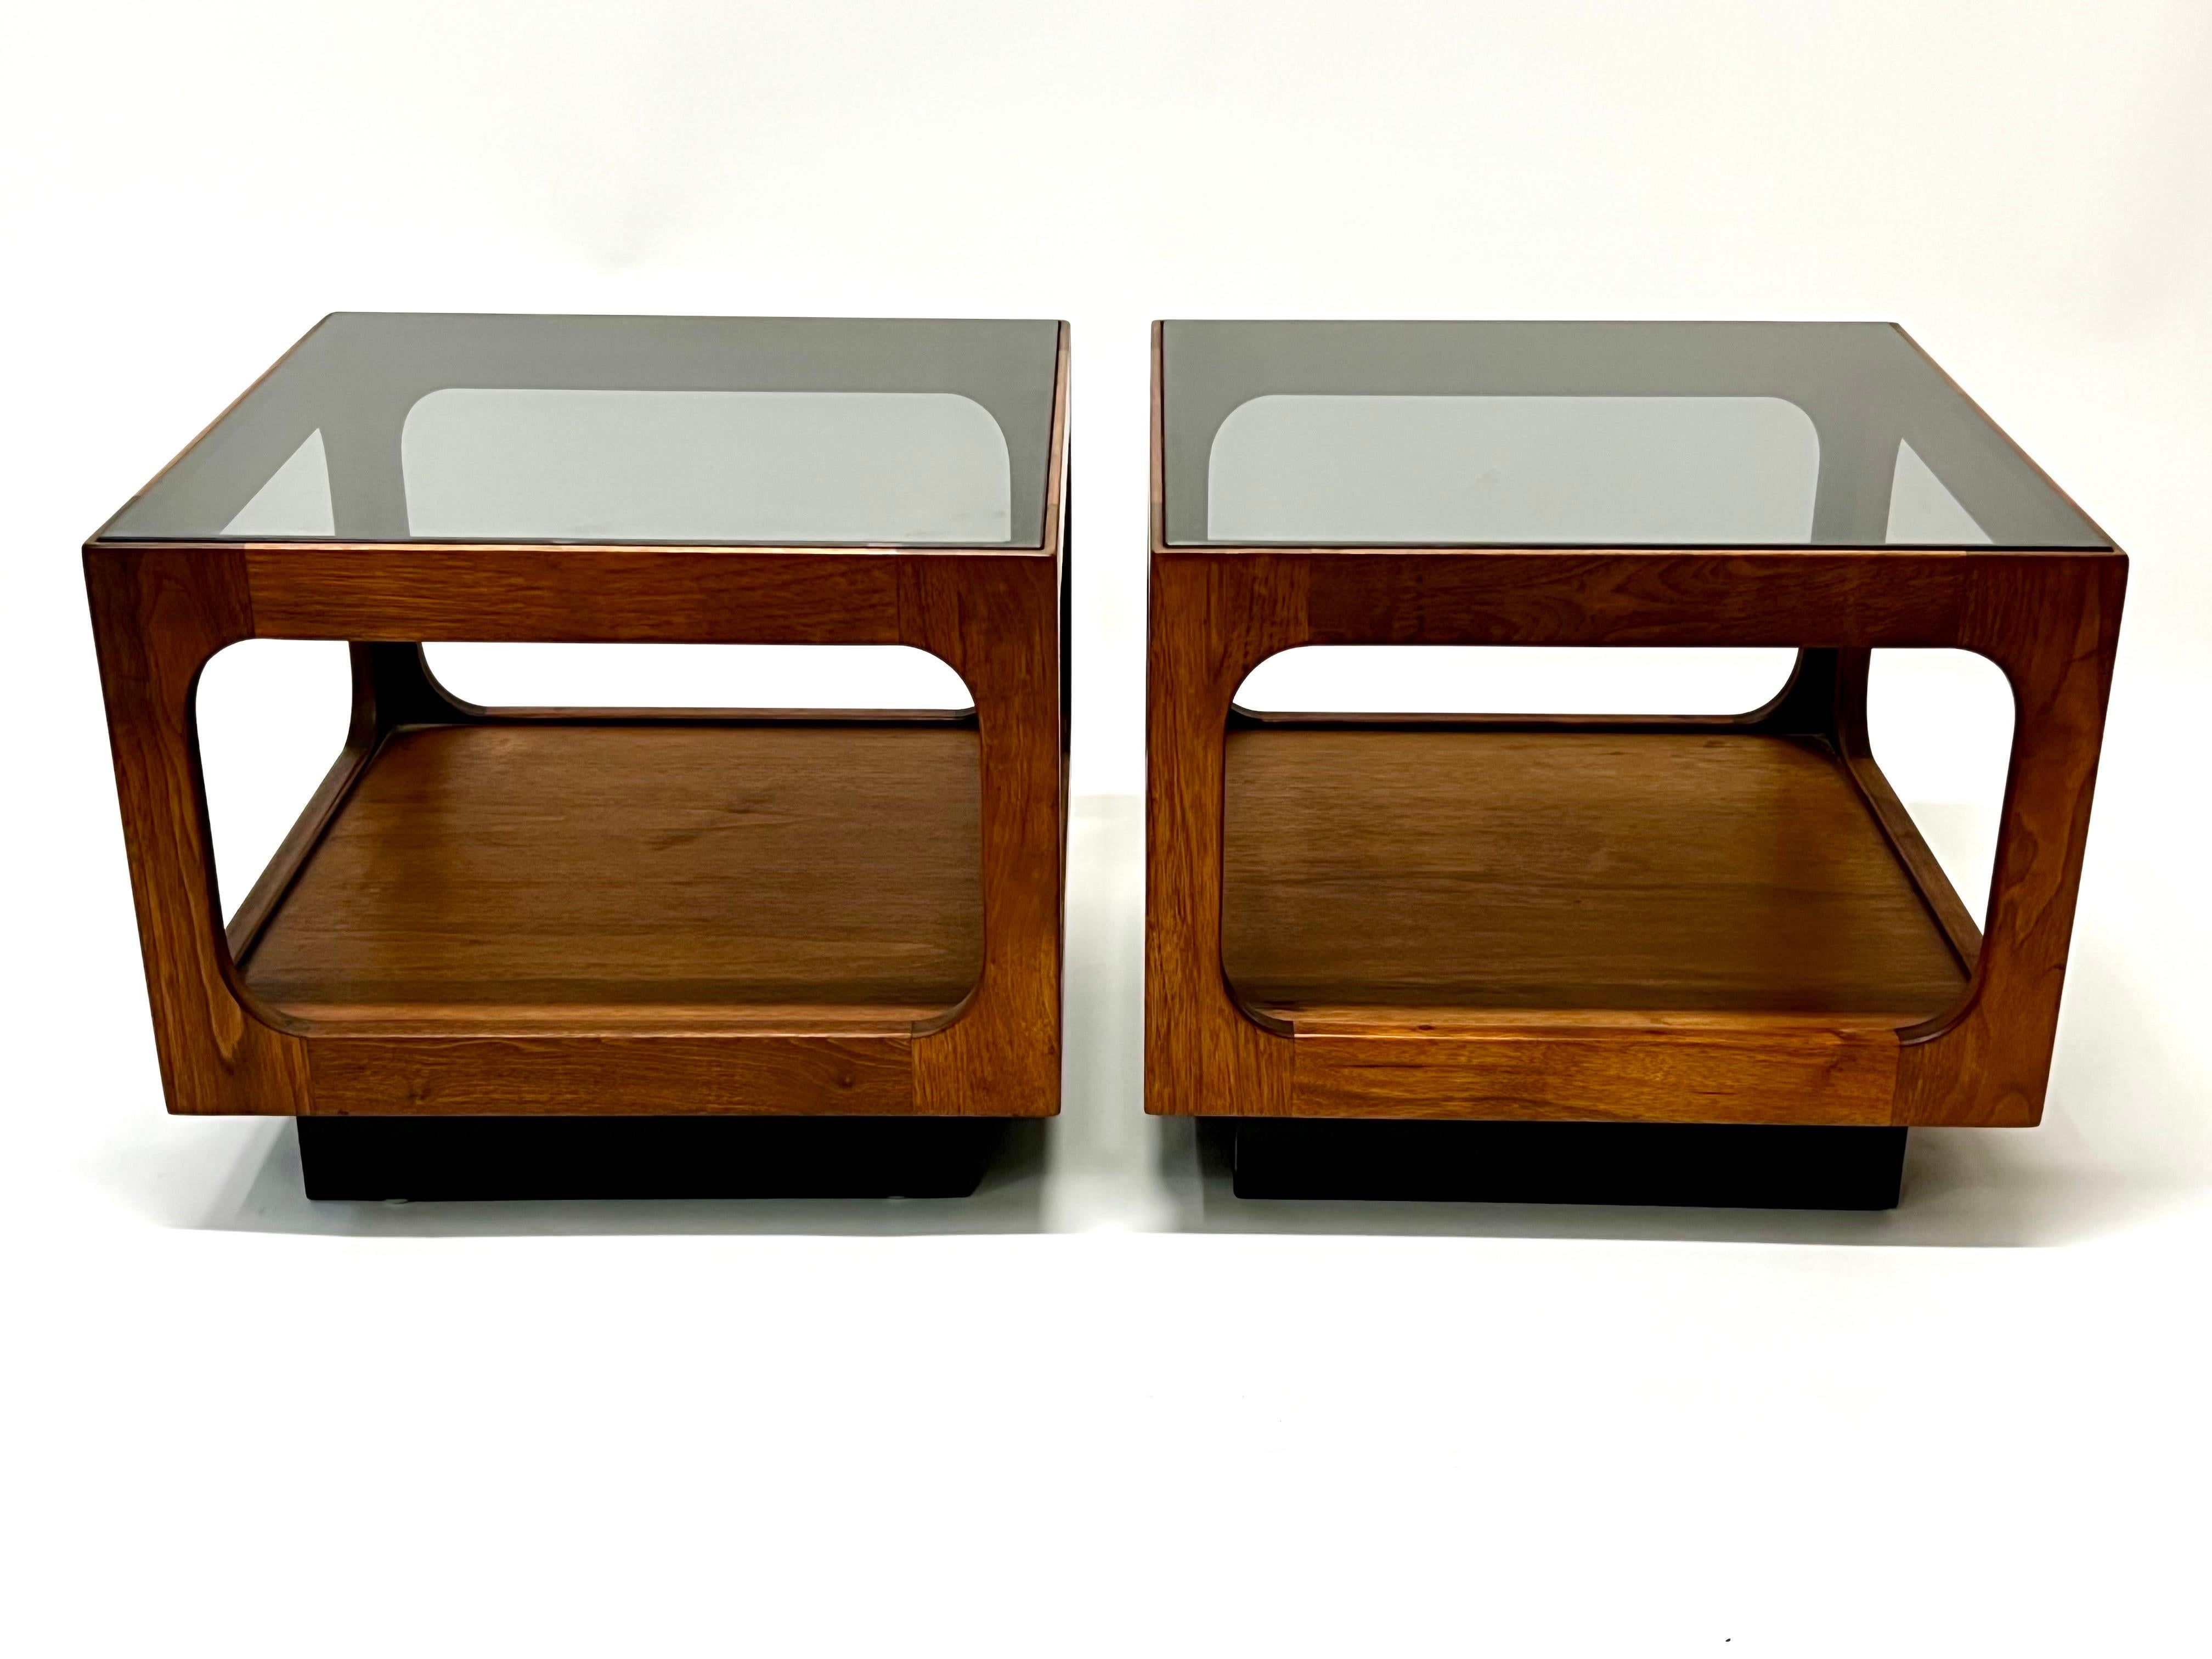 Wonderful pair of walnut side tables or nightstands with original smoked glass tops by California designer, John Keal c1960s. Keal one of a handful of designers who worked for Brown-Saltman from the 1950s to the 1970s. Beautiful walnut cubes on a